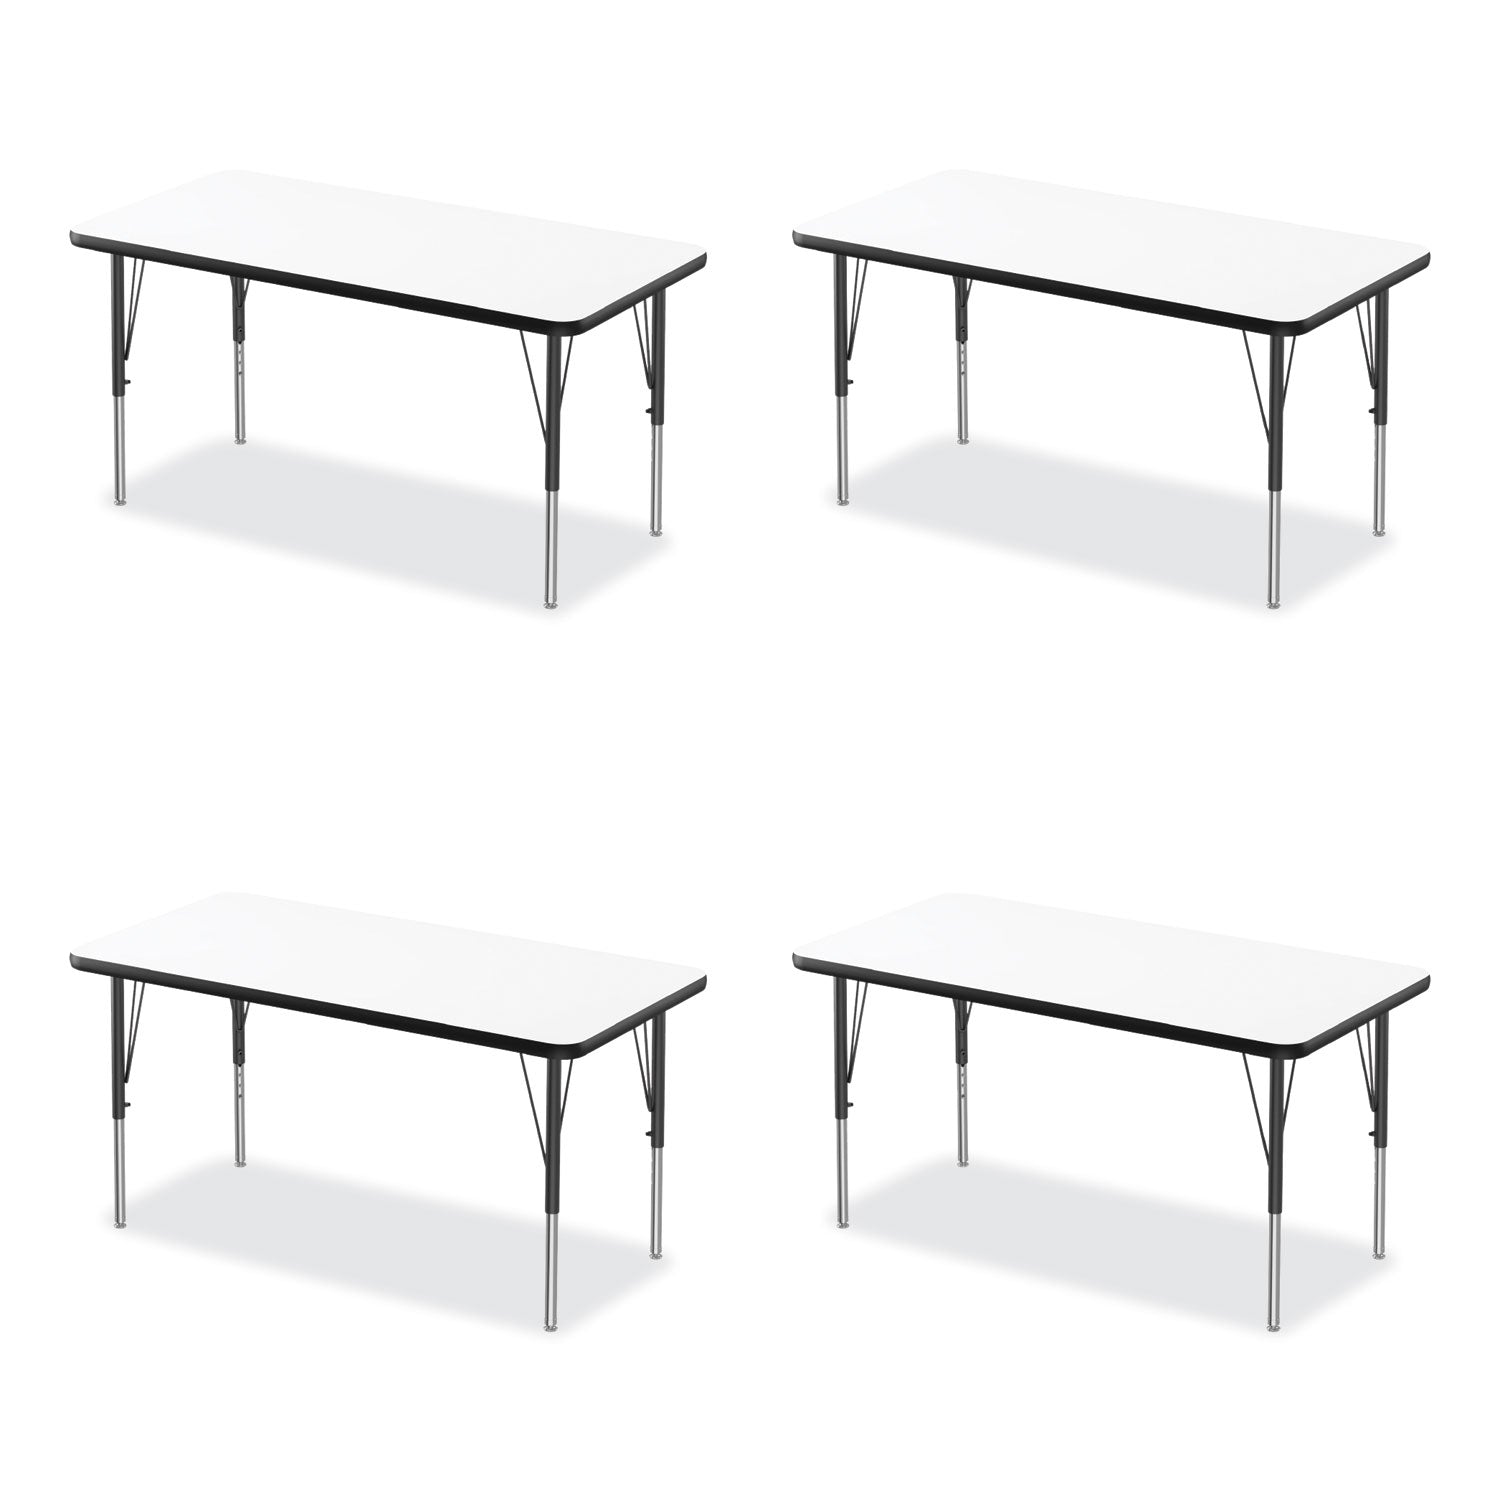 markerboard-activity-tables-rectangular-60-x-24-x-19-to-29-white-top-black-legs-4-pallet-ships-in-4-6-business-days_crl2460de80954p - 1